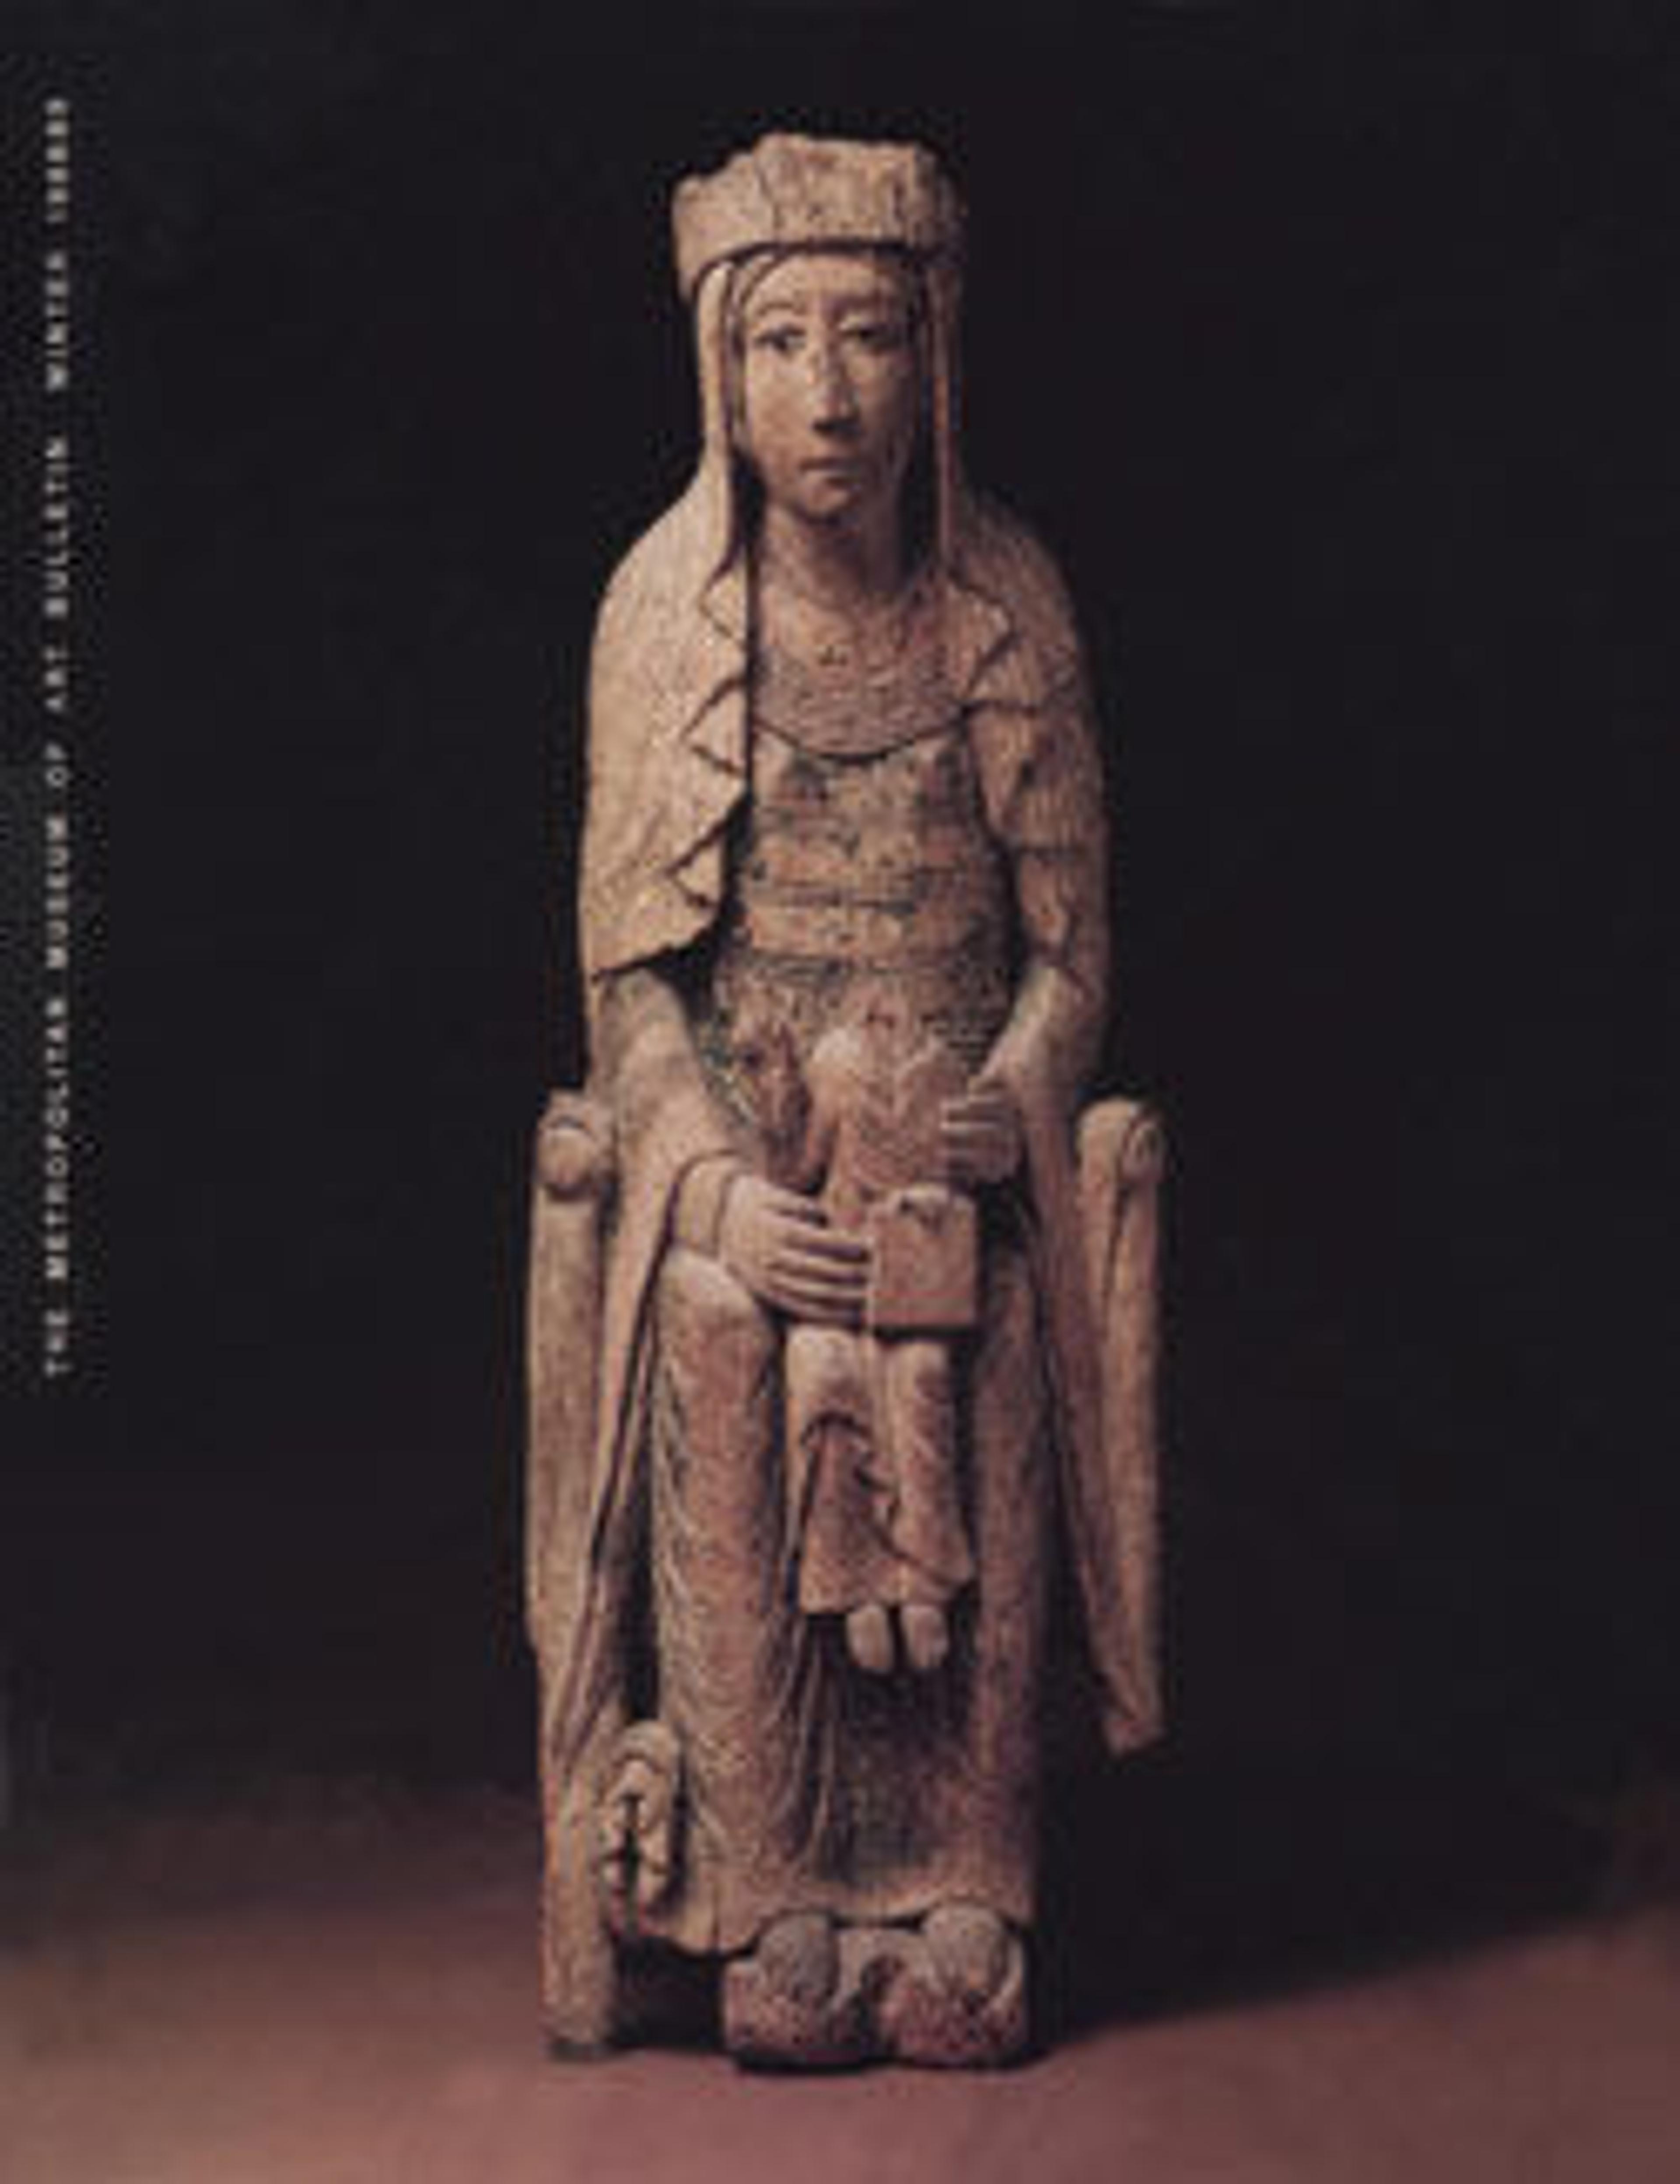 "Medieval Sculpture at The Cloisters": The Metropolitan Museum of Art Bulletin, v. 46, no. 3 (Winter, 1988-1989)